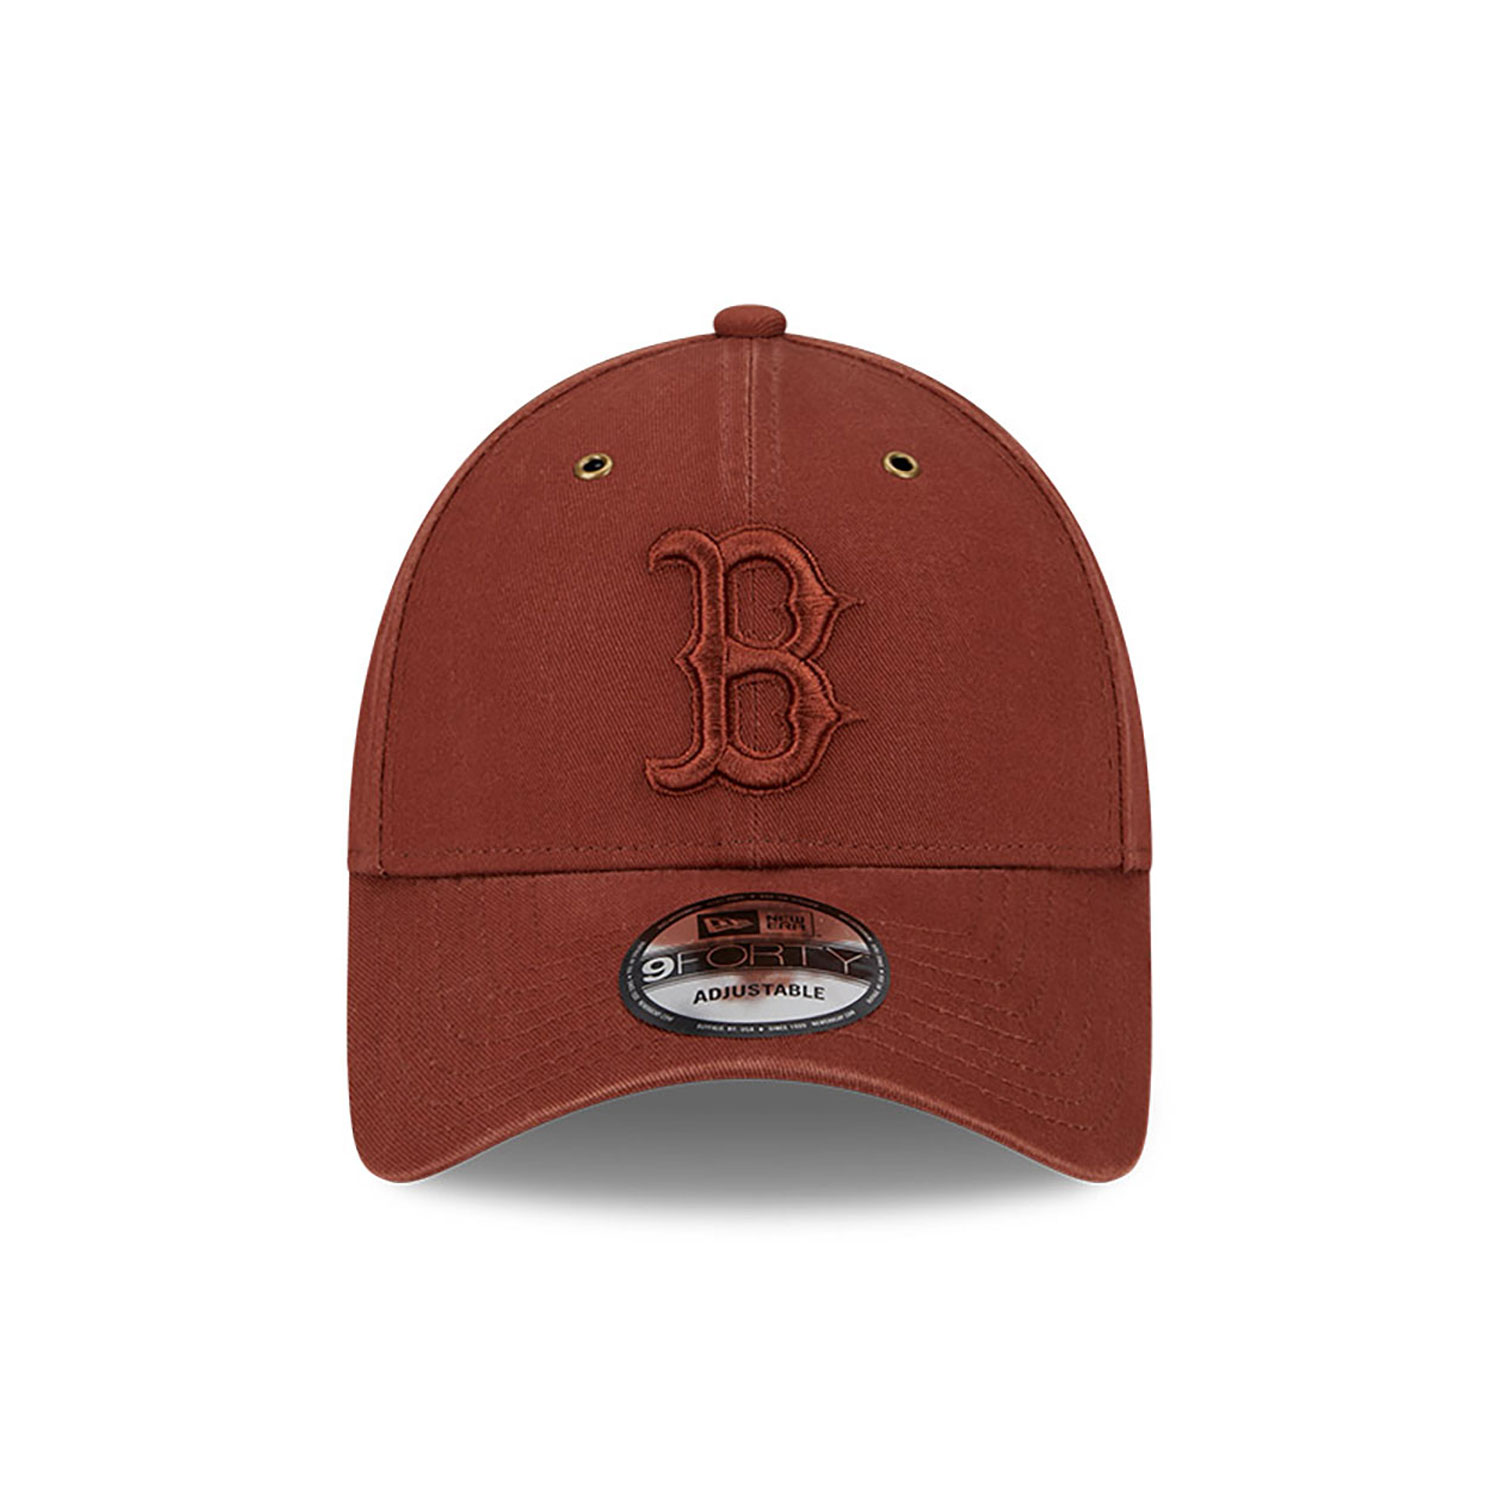 Boston Red Sox Washed Canvas Brown 9FORTY Adjustable Cap